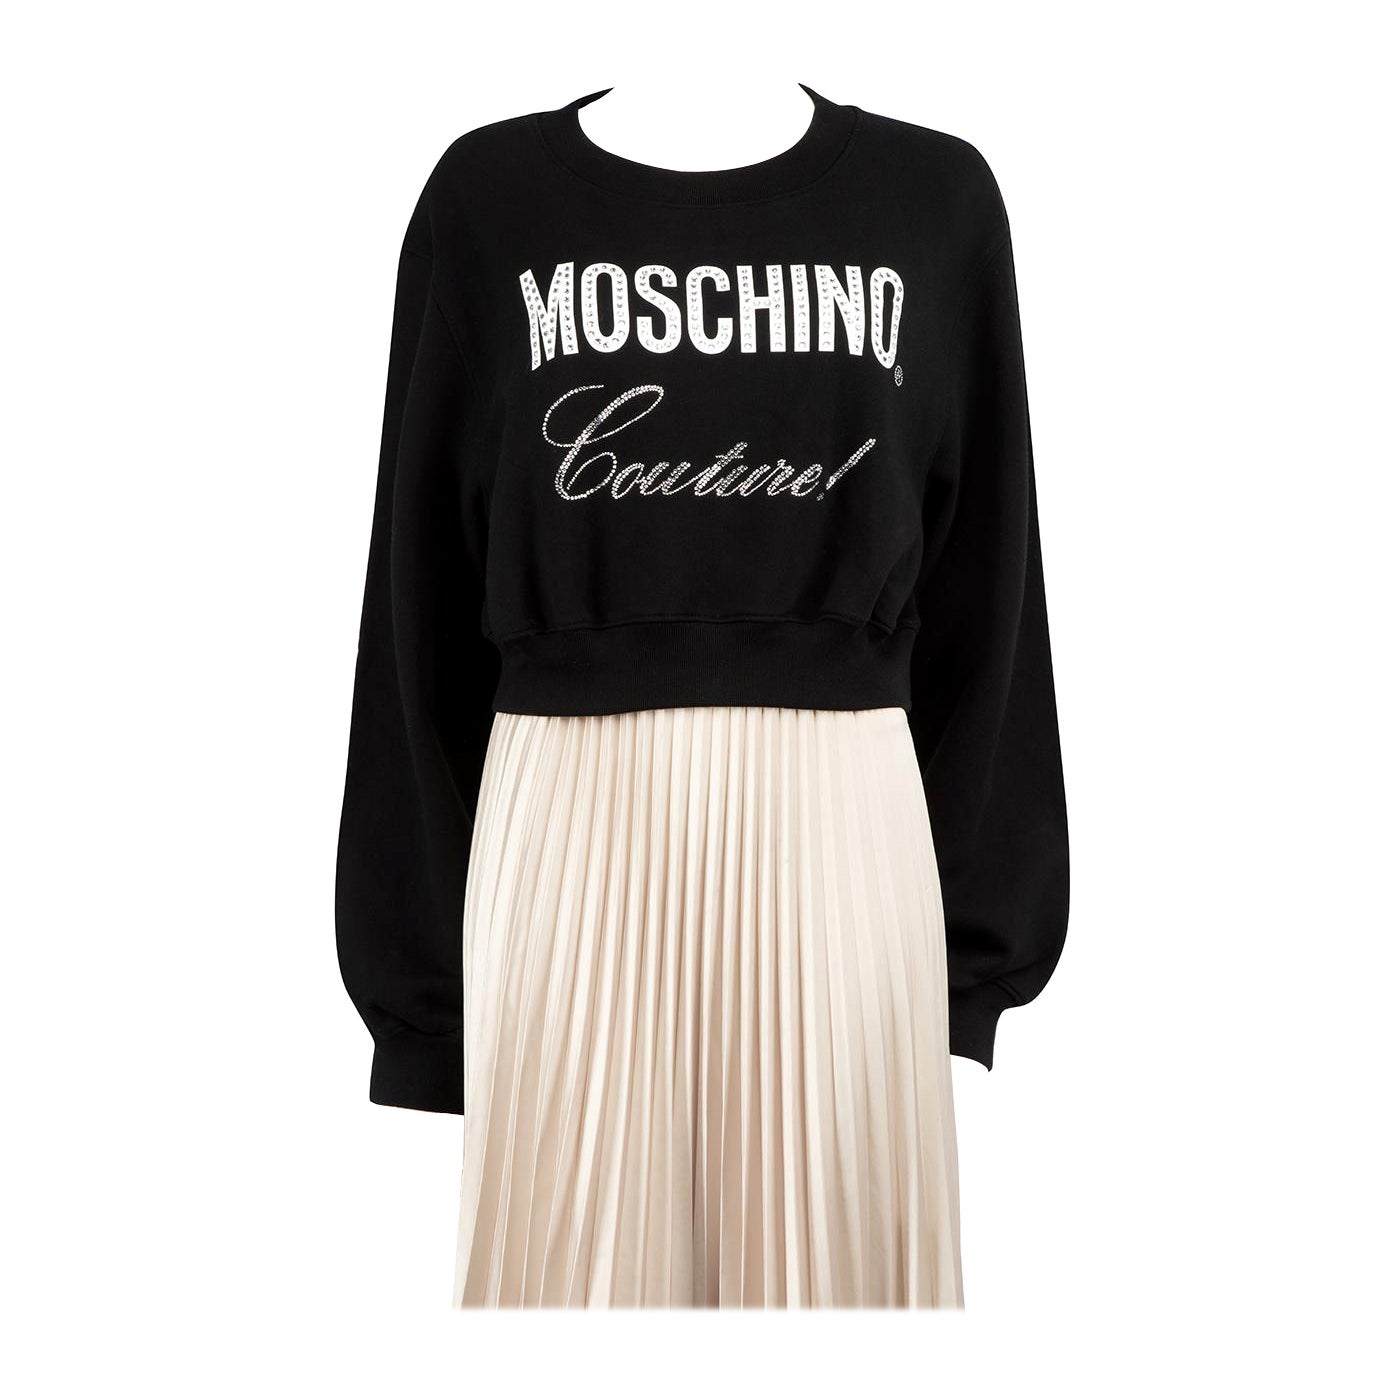 Moschino Moschino Couture! Black Fantasy Print Embellished Sweatshirt Size M For Sale